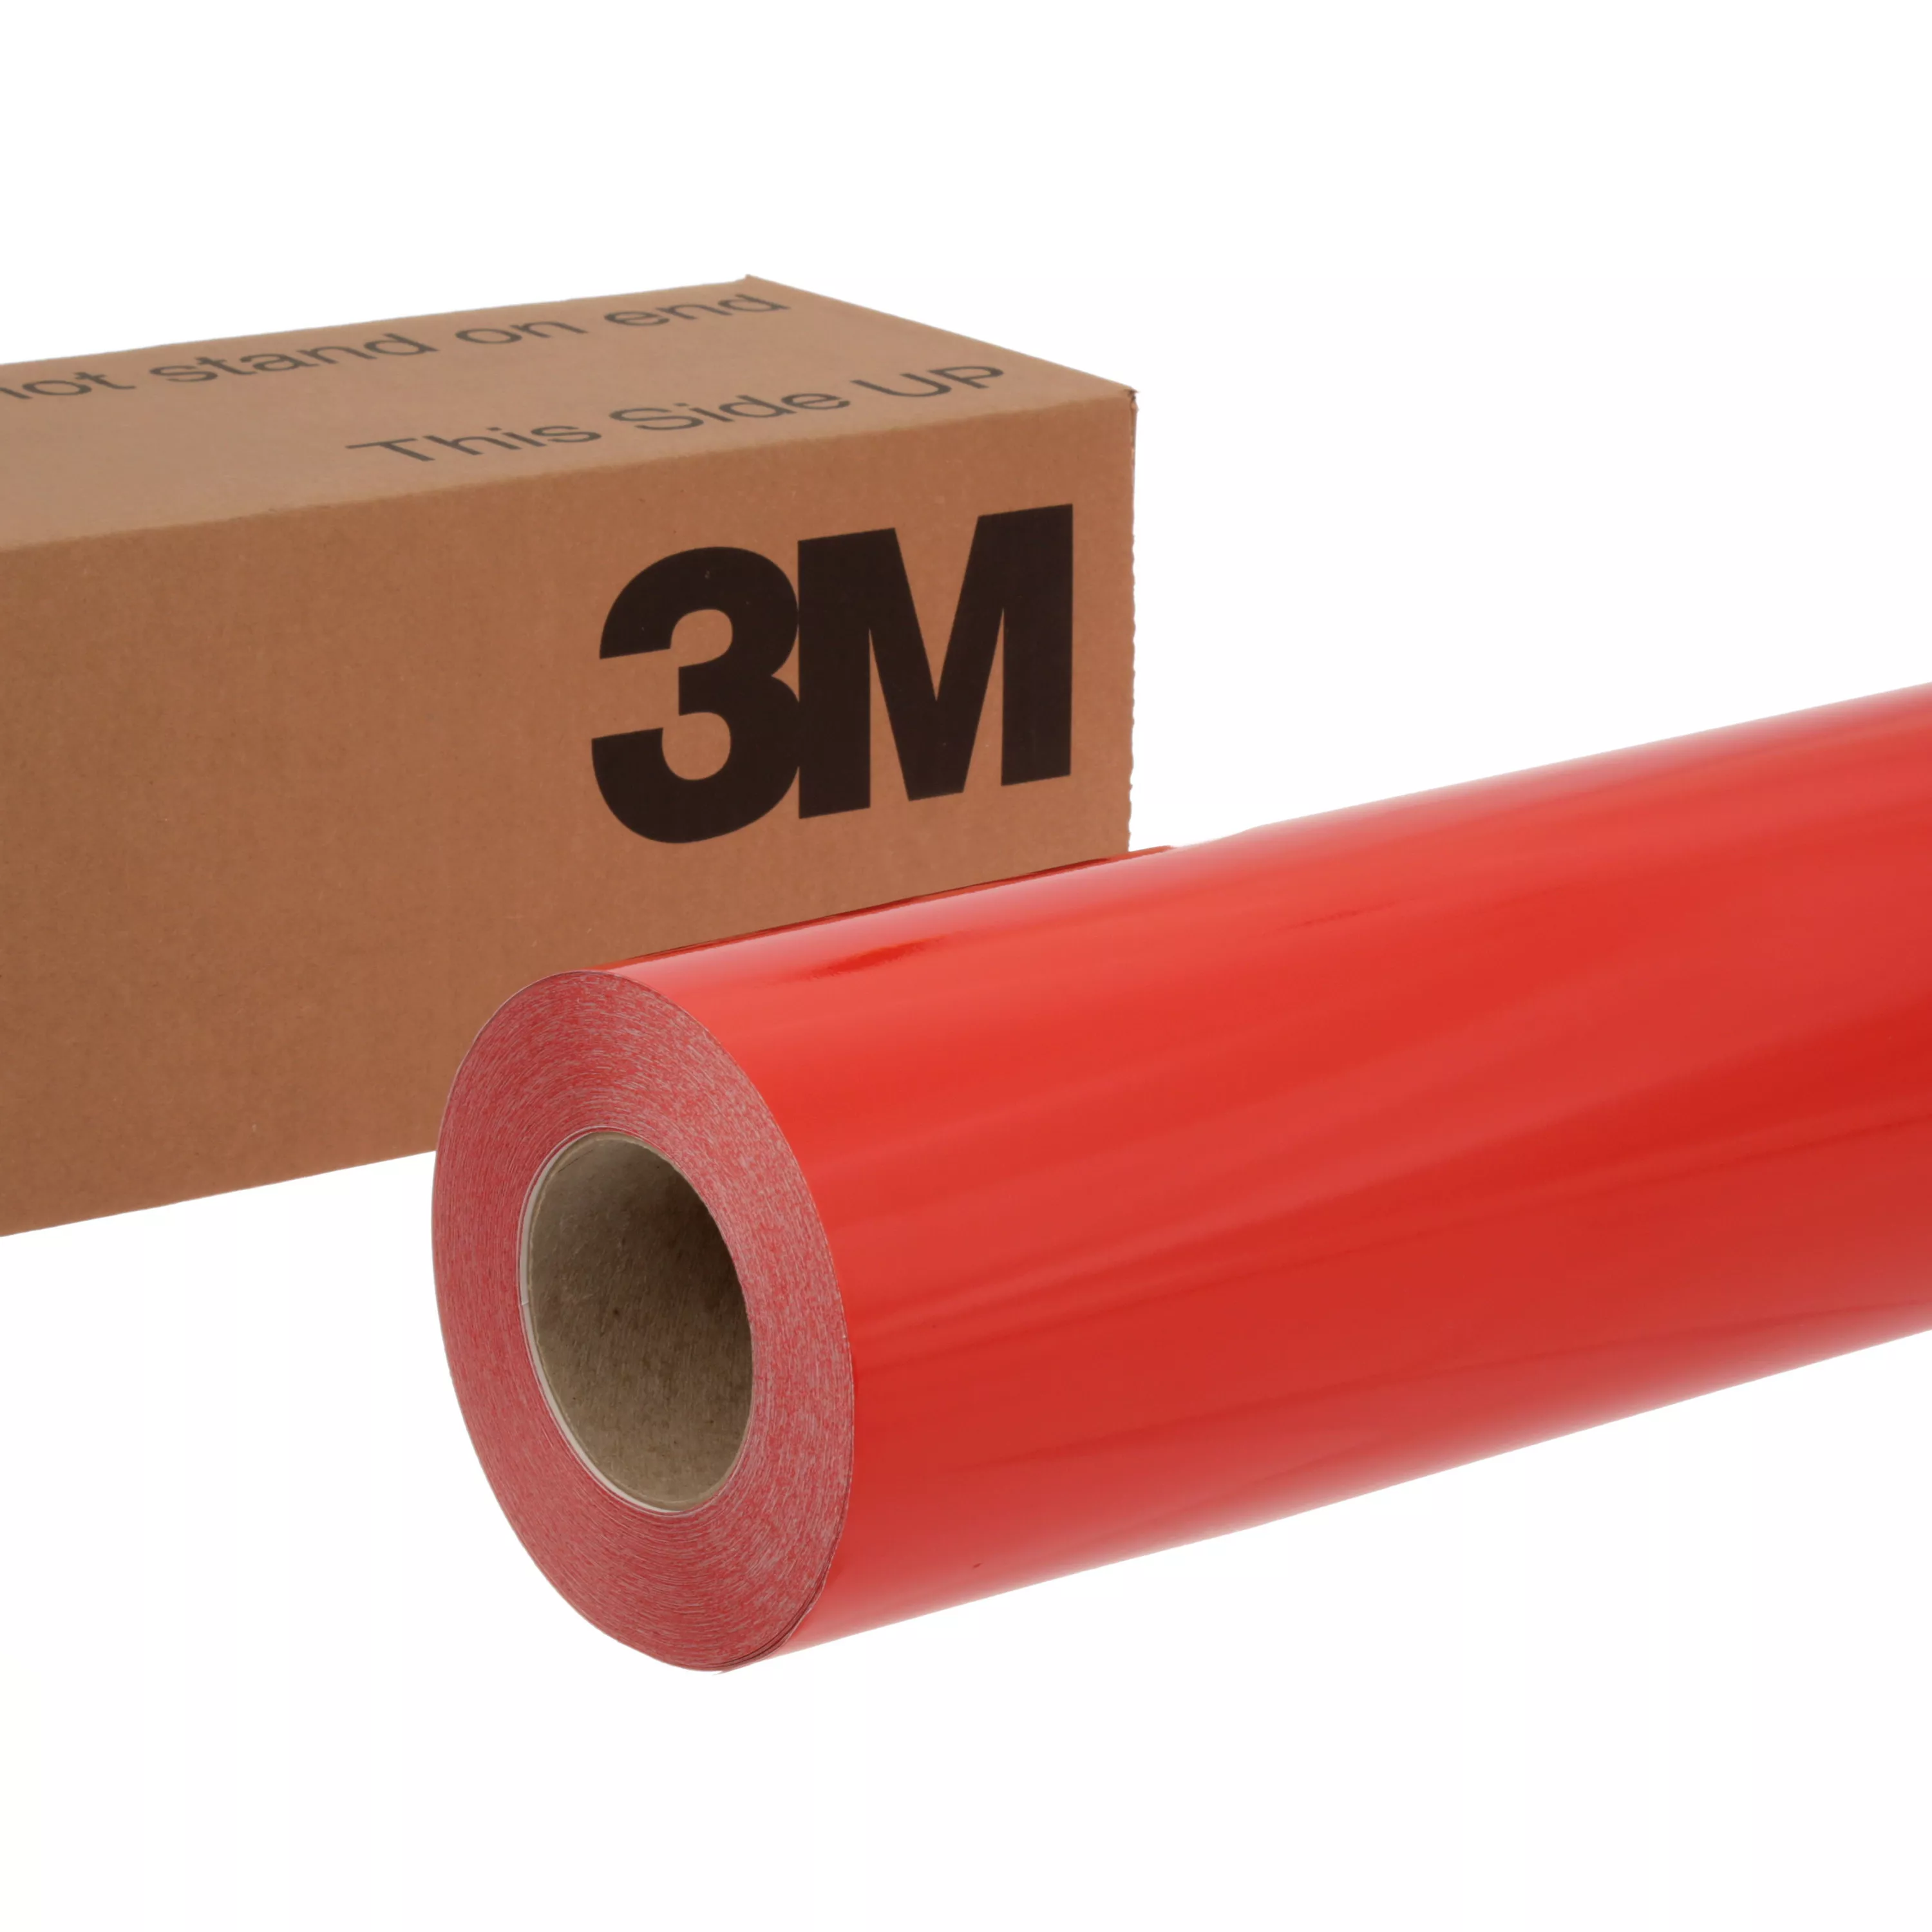 3M™ Scotchcal™ ElectroCut™ Graphic Film 7725-13, Tomato Red, 36 in x 50
yd